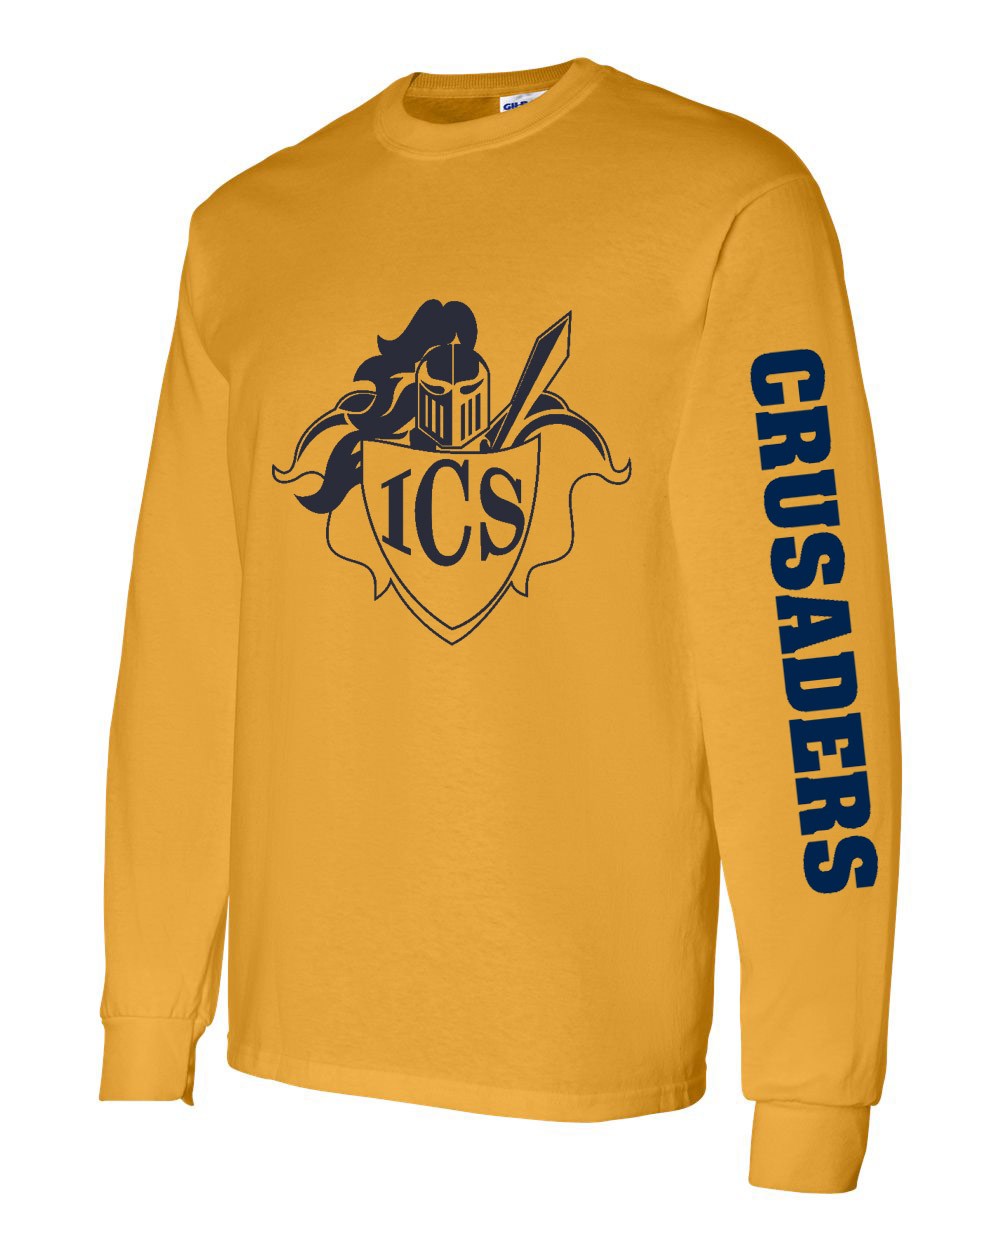 ICS Staff L/S T-Shirt w/ Navy Logo #F10 - Please Allow 2-3 Weeks for Delivery